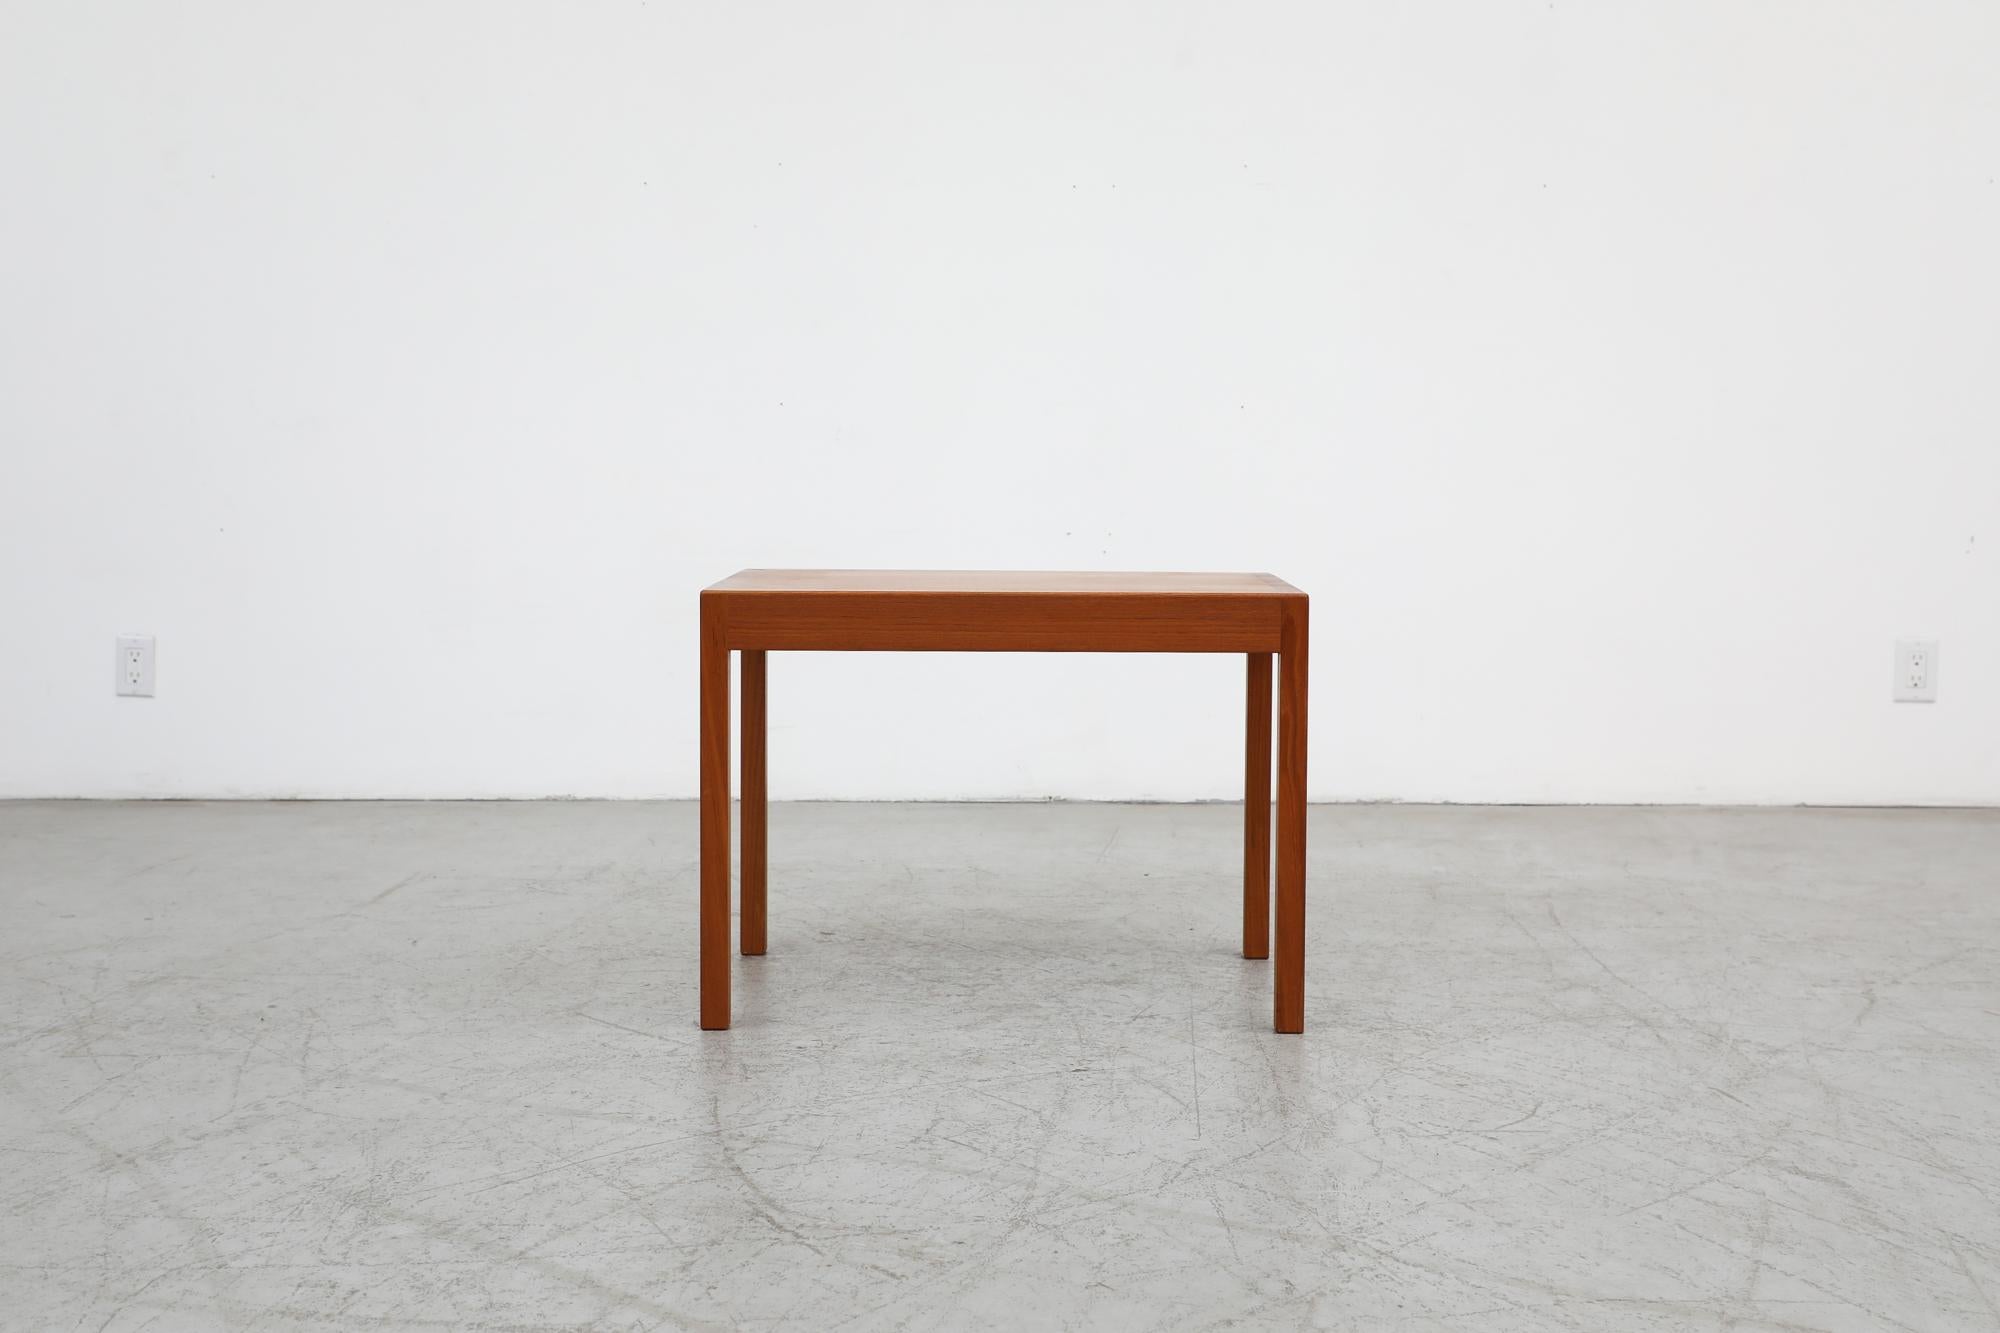 Gorgeous Danish Mid-Century Modern teak side table by acclaimed designer Hans J. Wegner for Andreas Tuck. Sparse and minimalist design with clean and simple lines add a timelessness to this piece. Manufacturer's stamp on bottom. In original